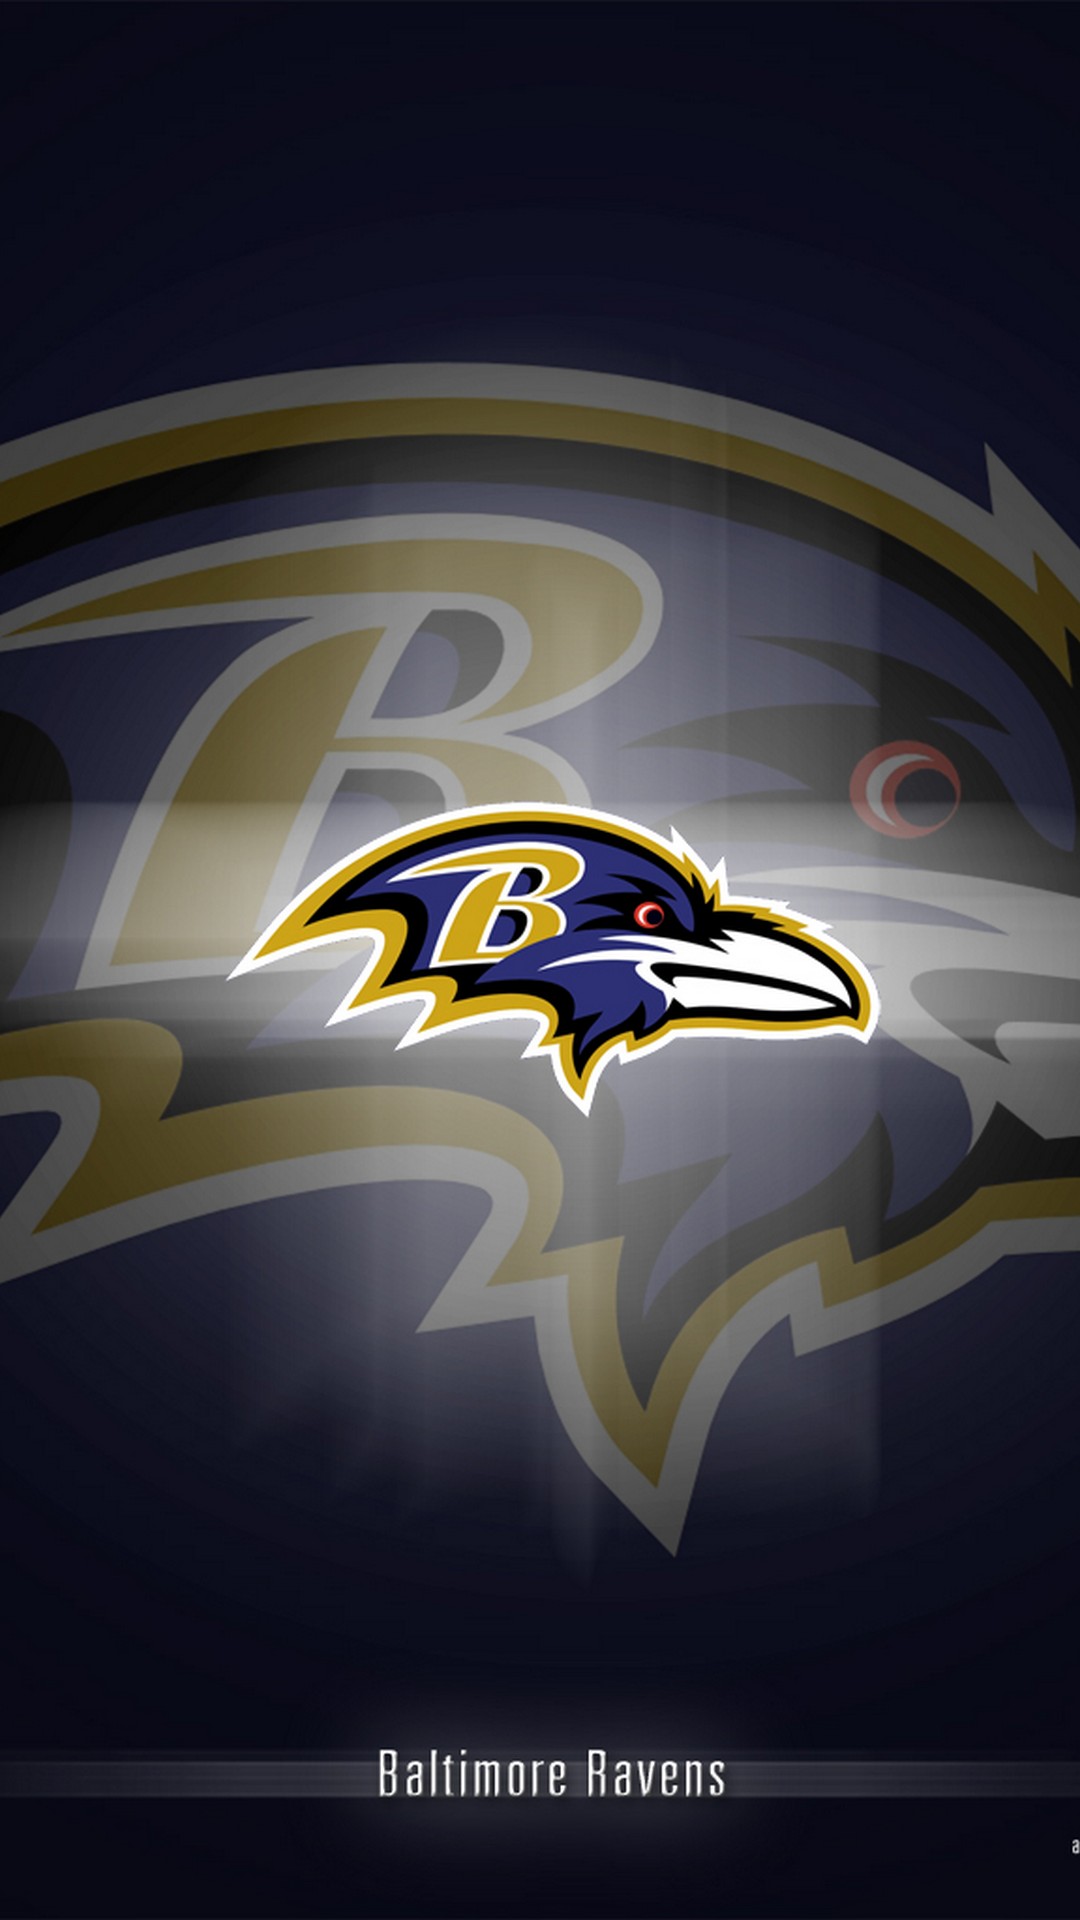 Baltimore Ravens iPhone Wallpaper Lock Screen with high-resolution 1080x1920 pixel. Download and set as wallpaper for Apple iPhone X, XS Max, XR, 8, 7, 6, SE, iPad, Android